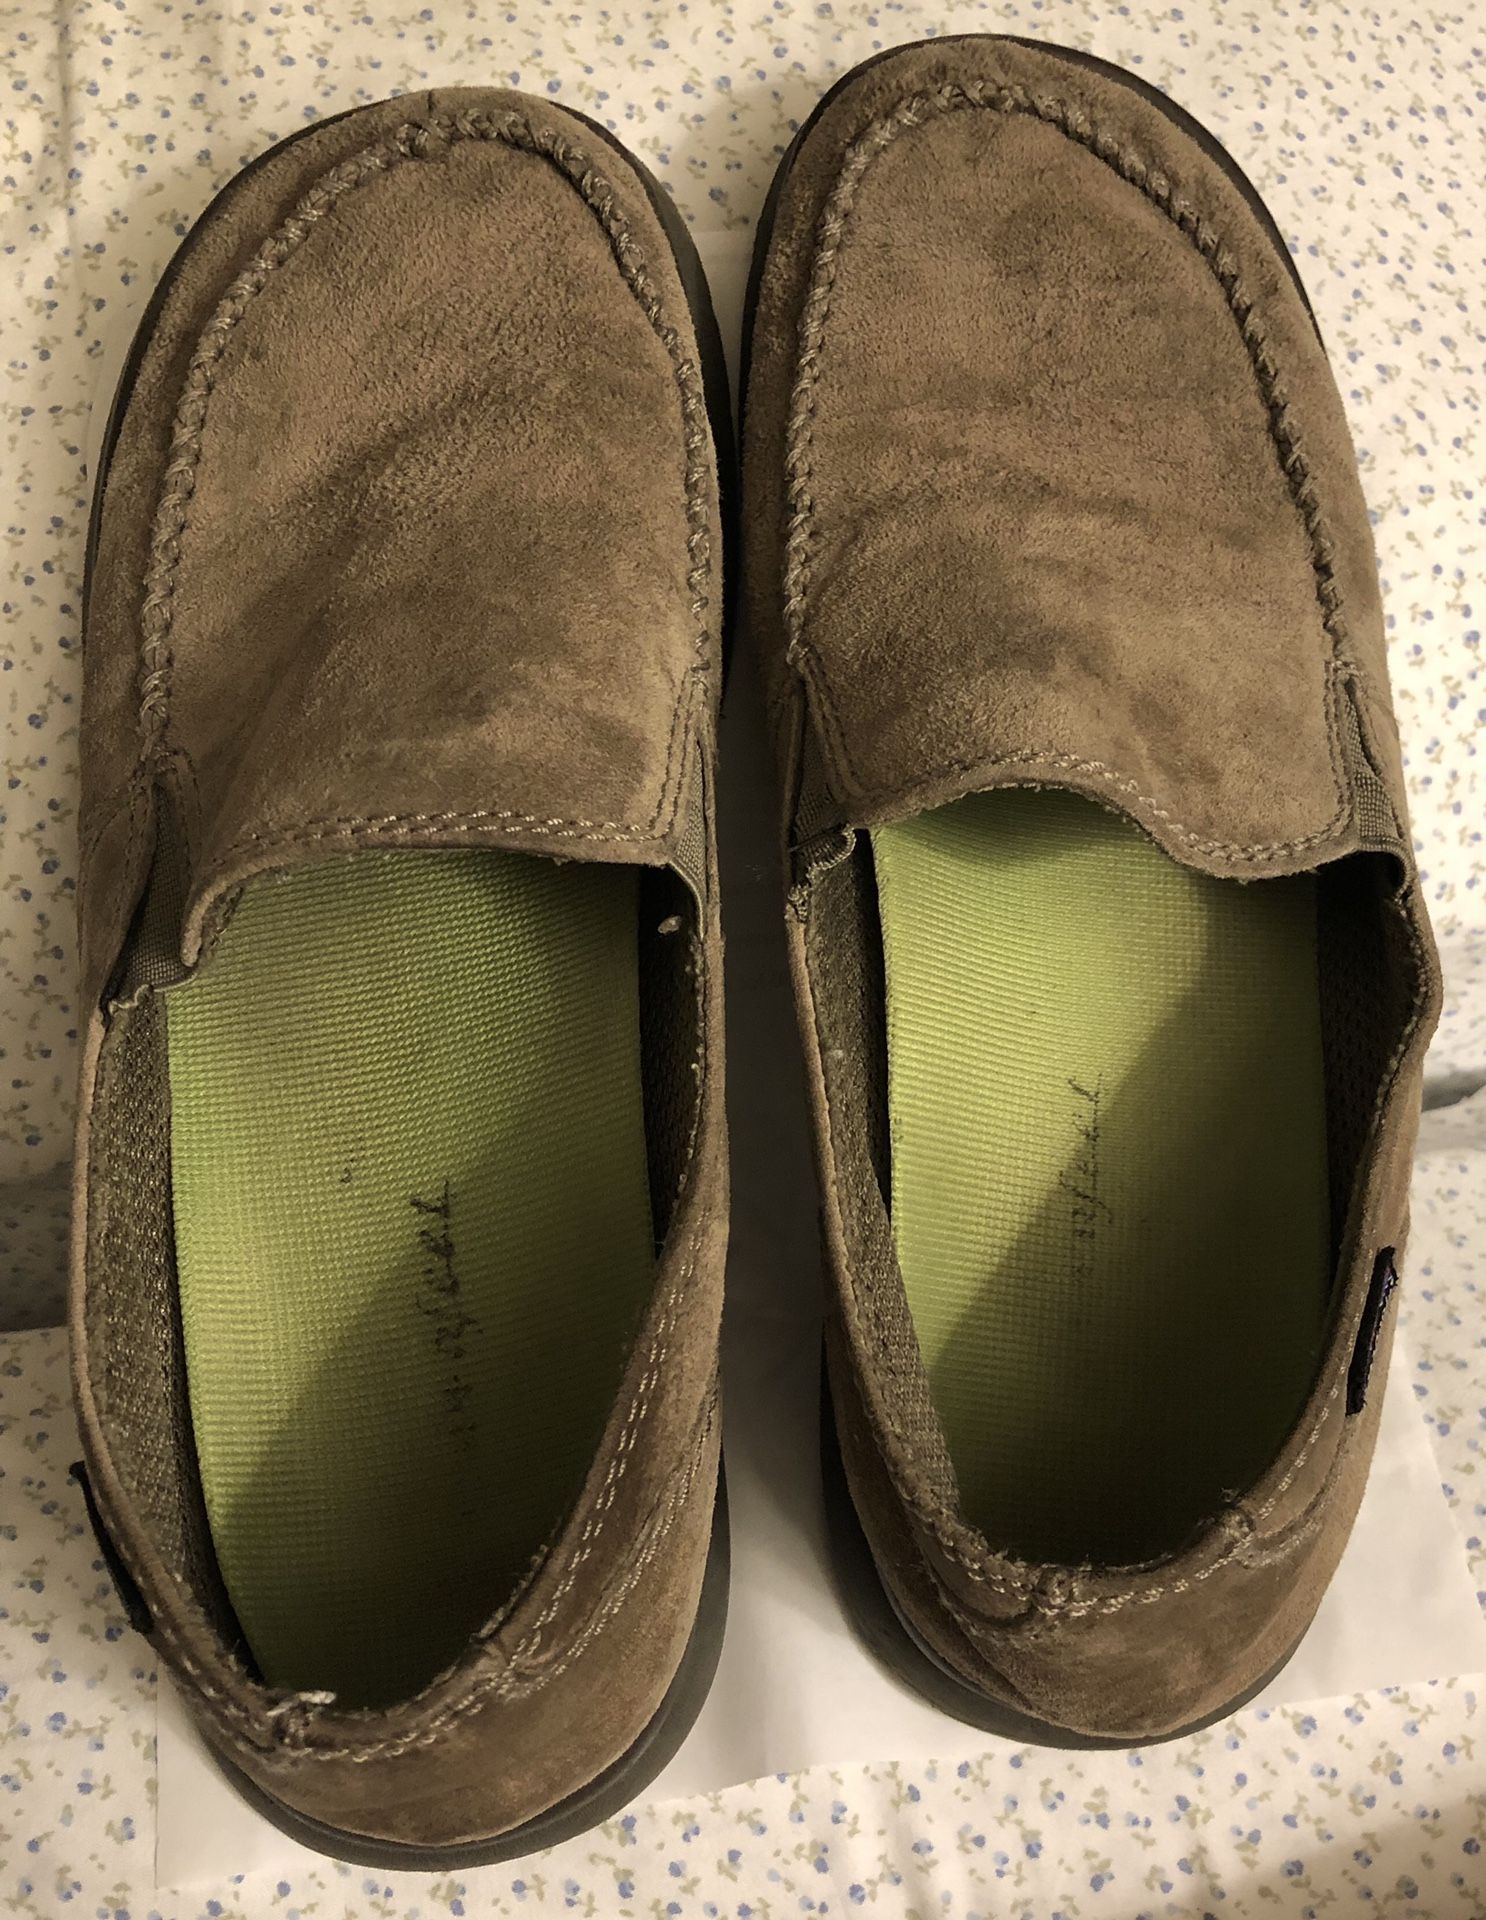 Patagonia shoes size 9.5